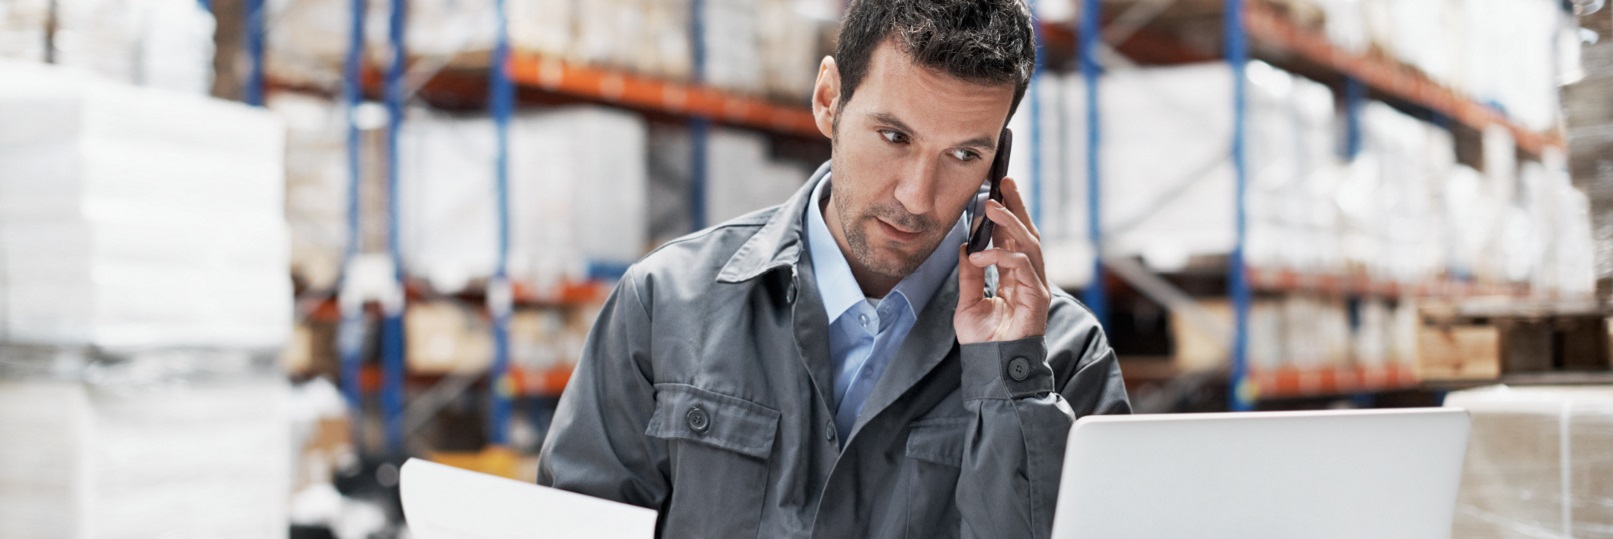 Employer on phone at laptop in warehouse.